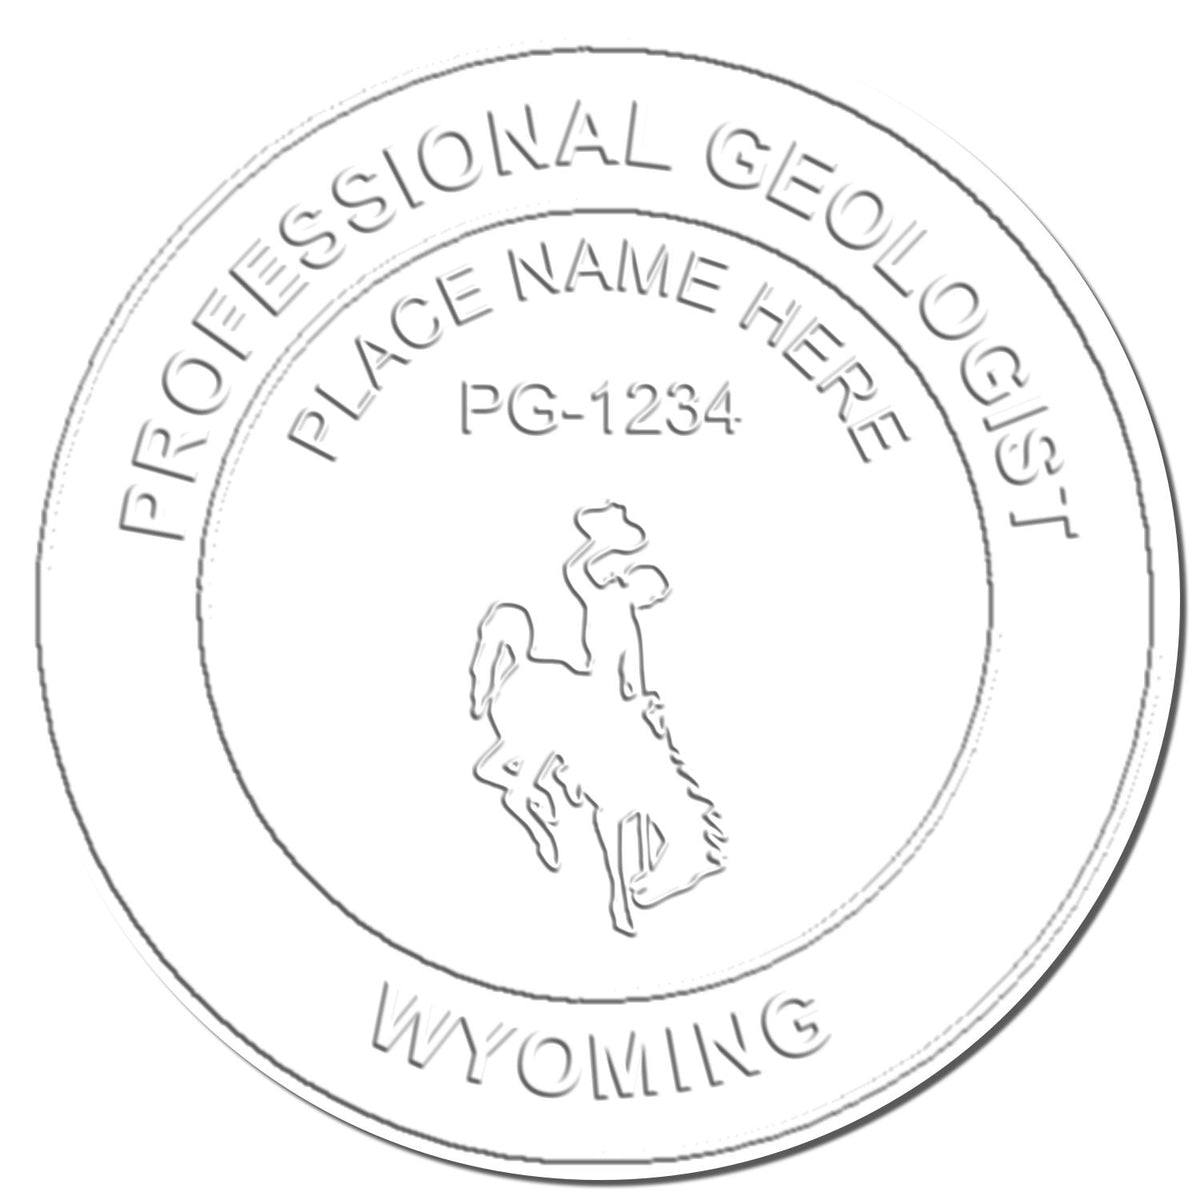 A photograph of the State of Wyoming Extended Long Reach Geologist Seal stamp impression reveals a vivid, professional image of the on paper.